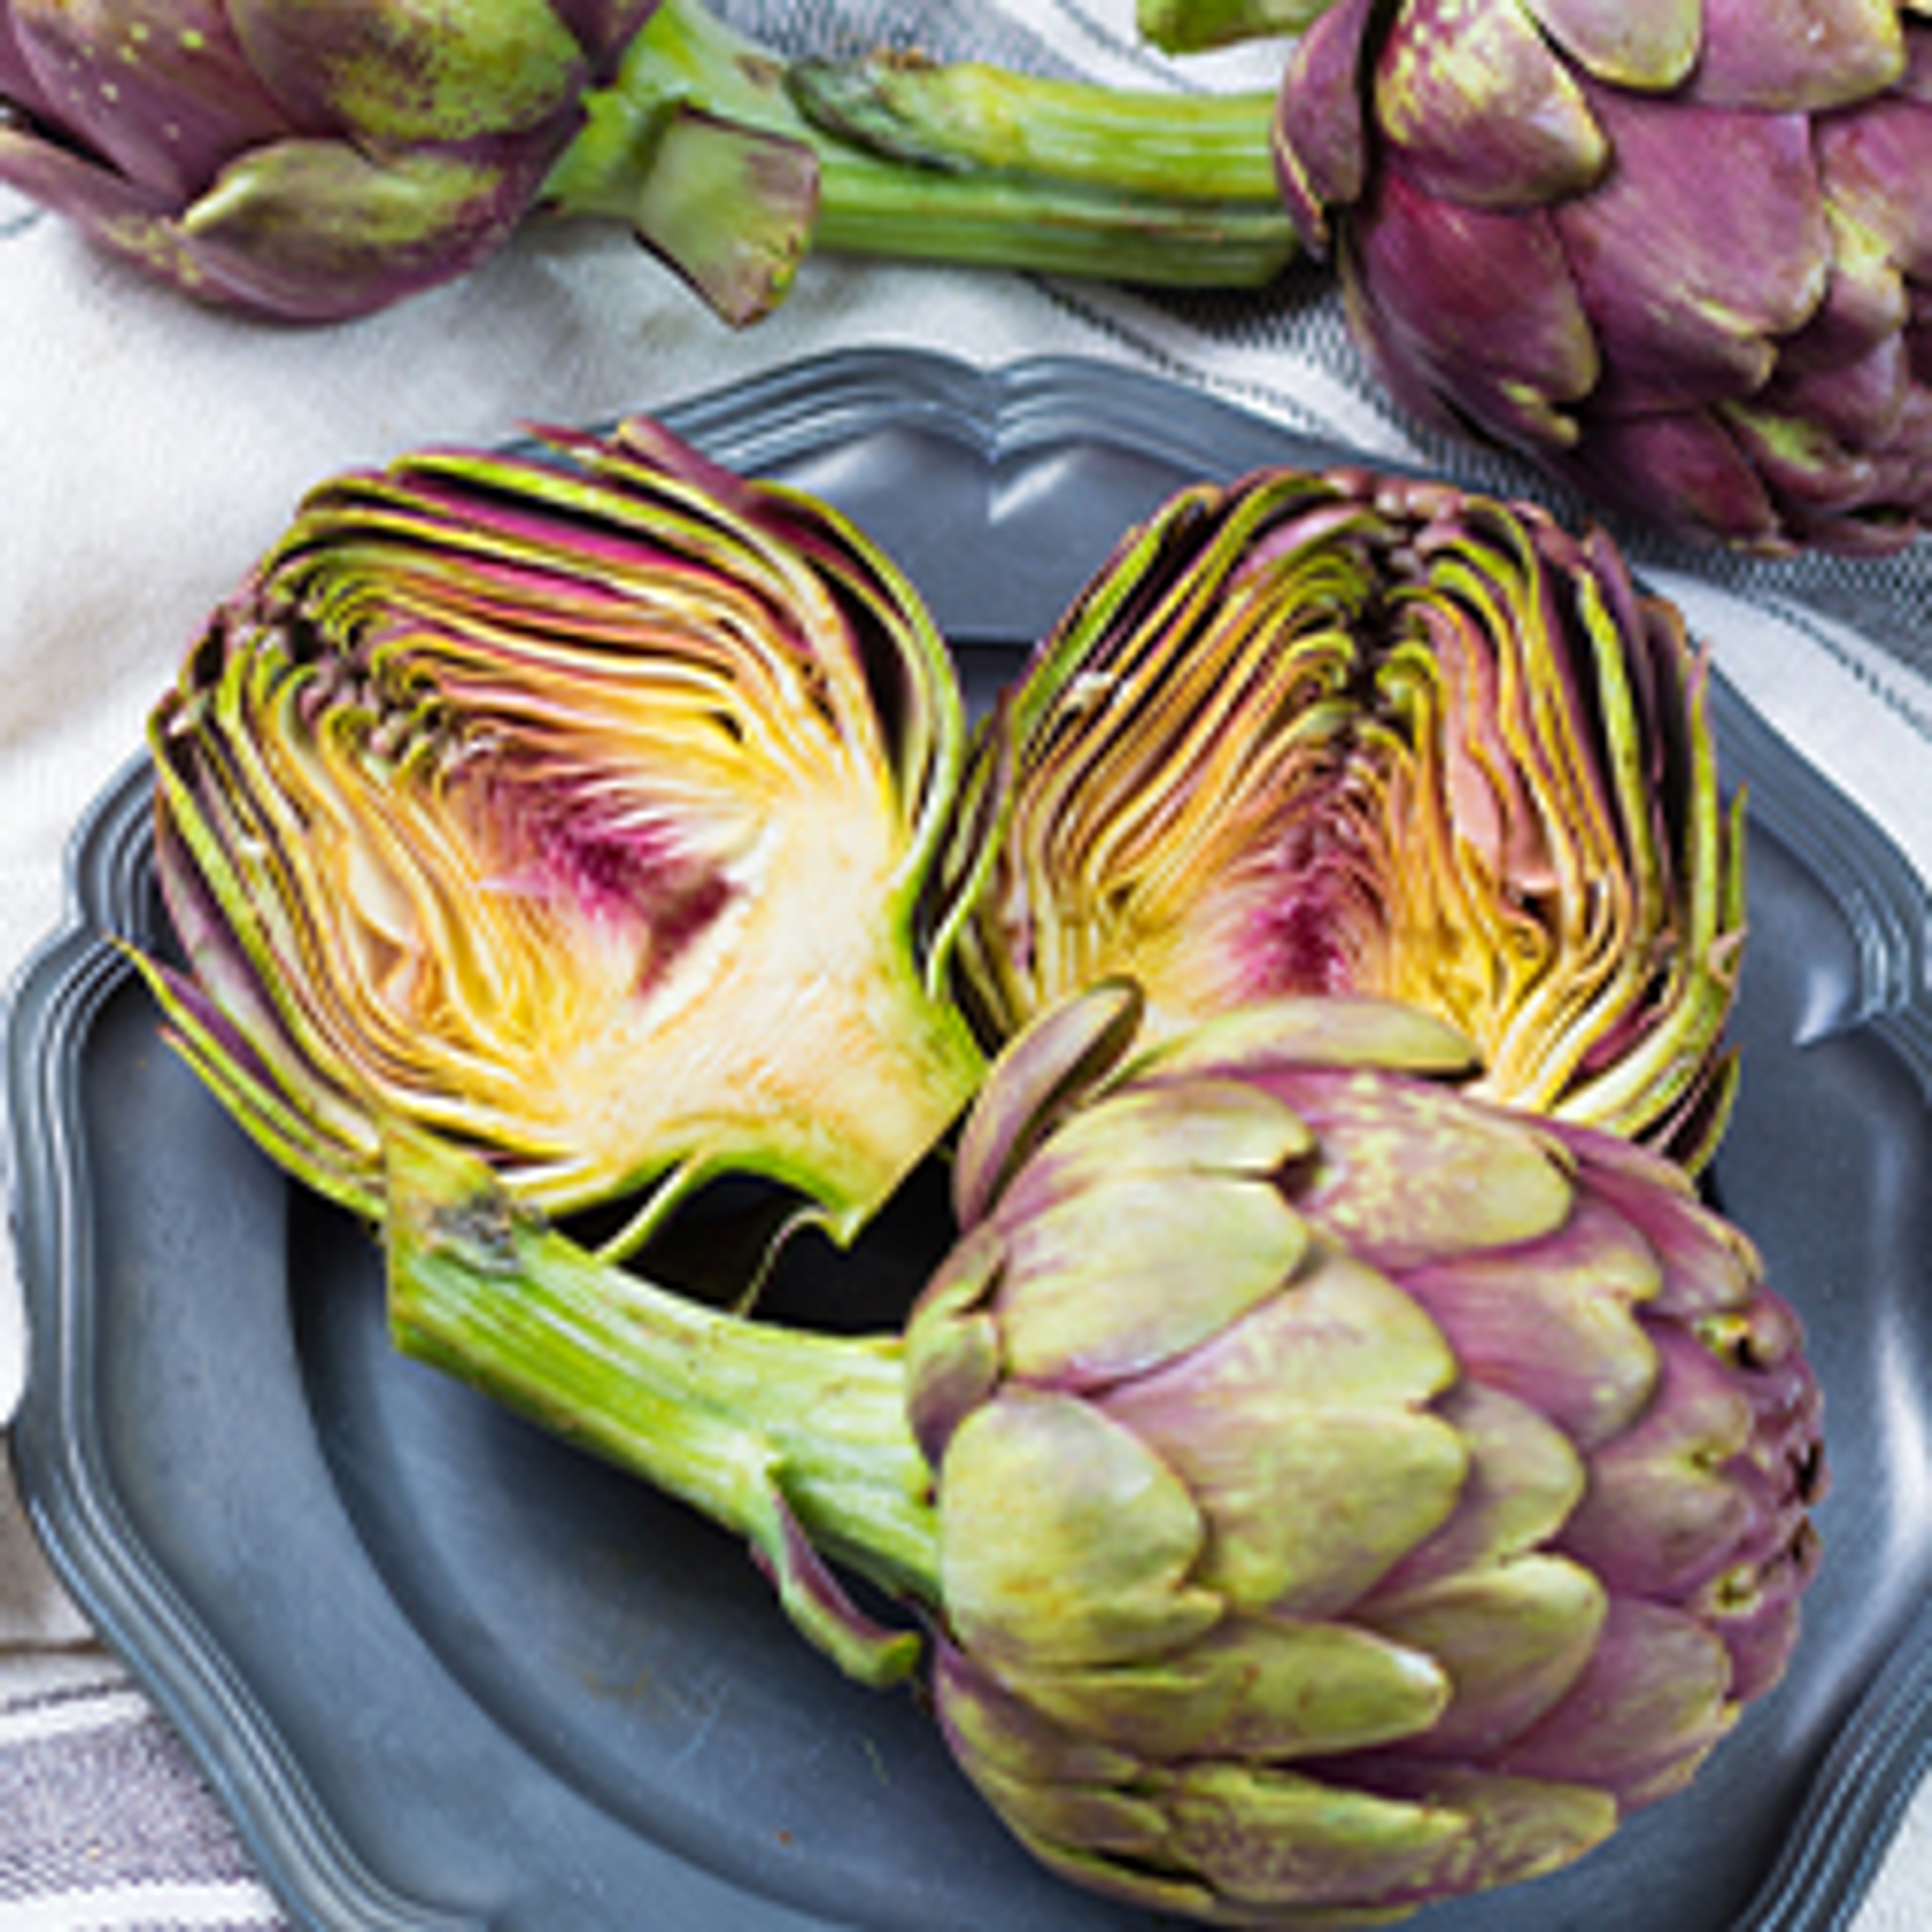 Artichoke Royal: Natural aid for your digestion and metabolism